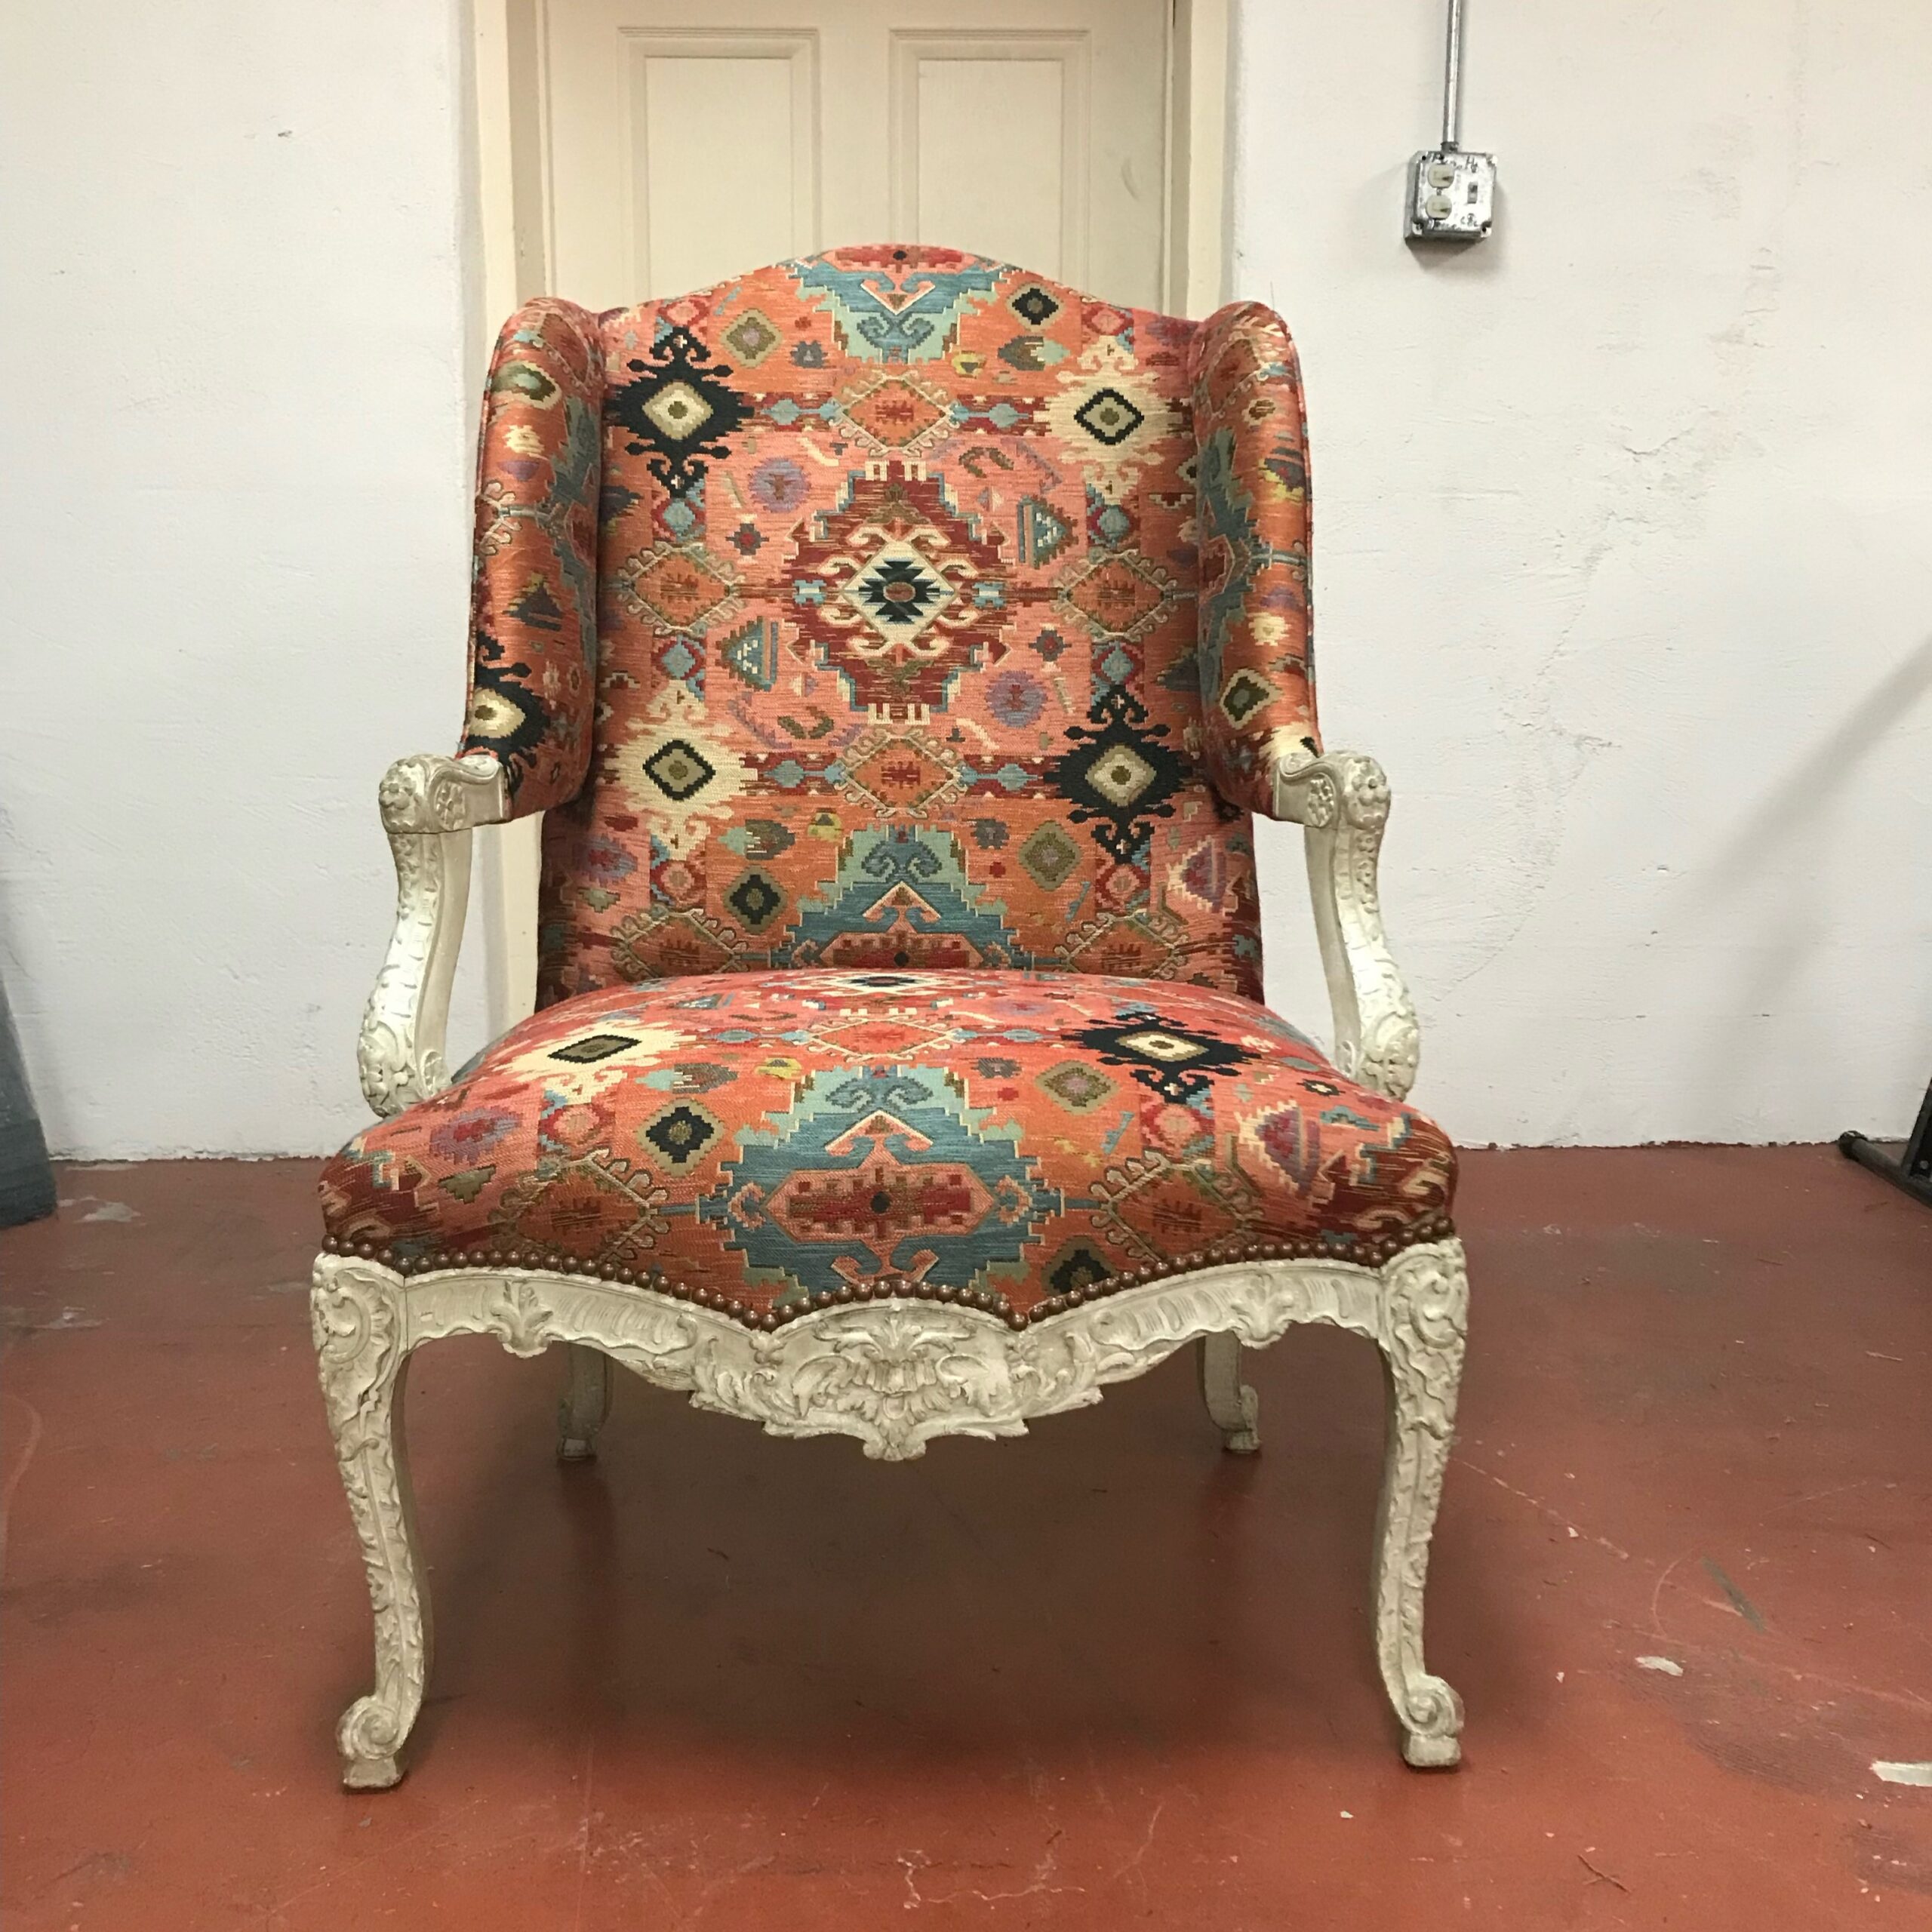 Thrift Store Furniture Makeover with Expert Tucson Upholstery